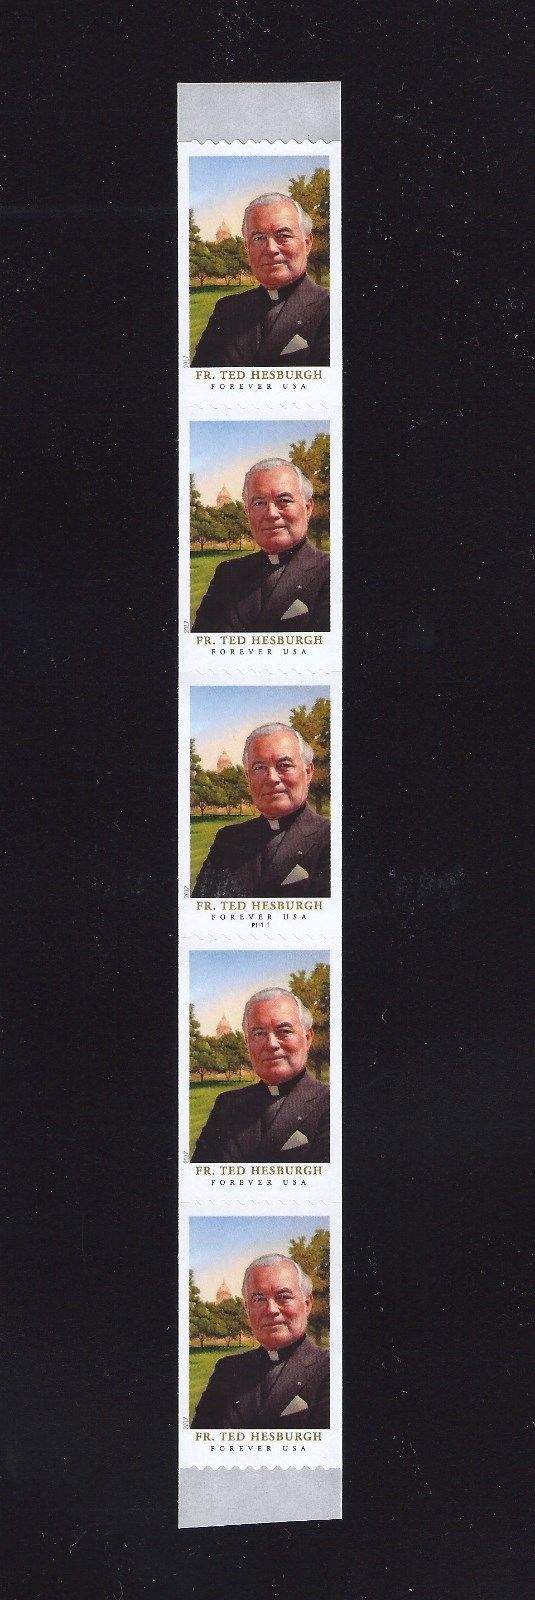 5242 Forever Stamp Father Ted Hesburgh PNC of 5 #5242pnc5